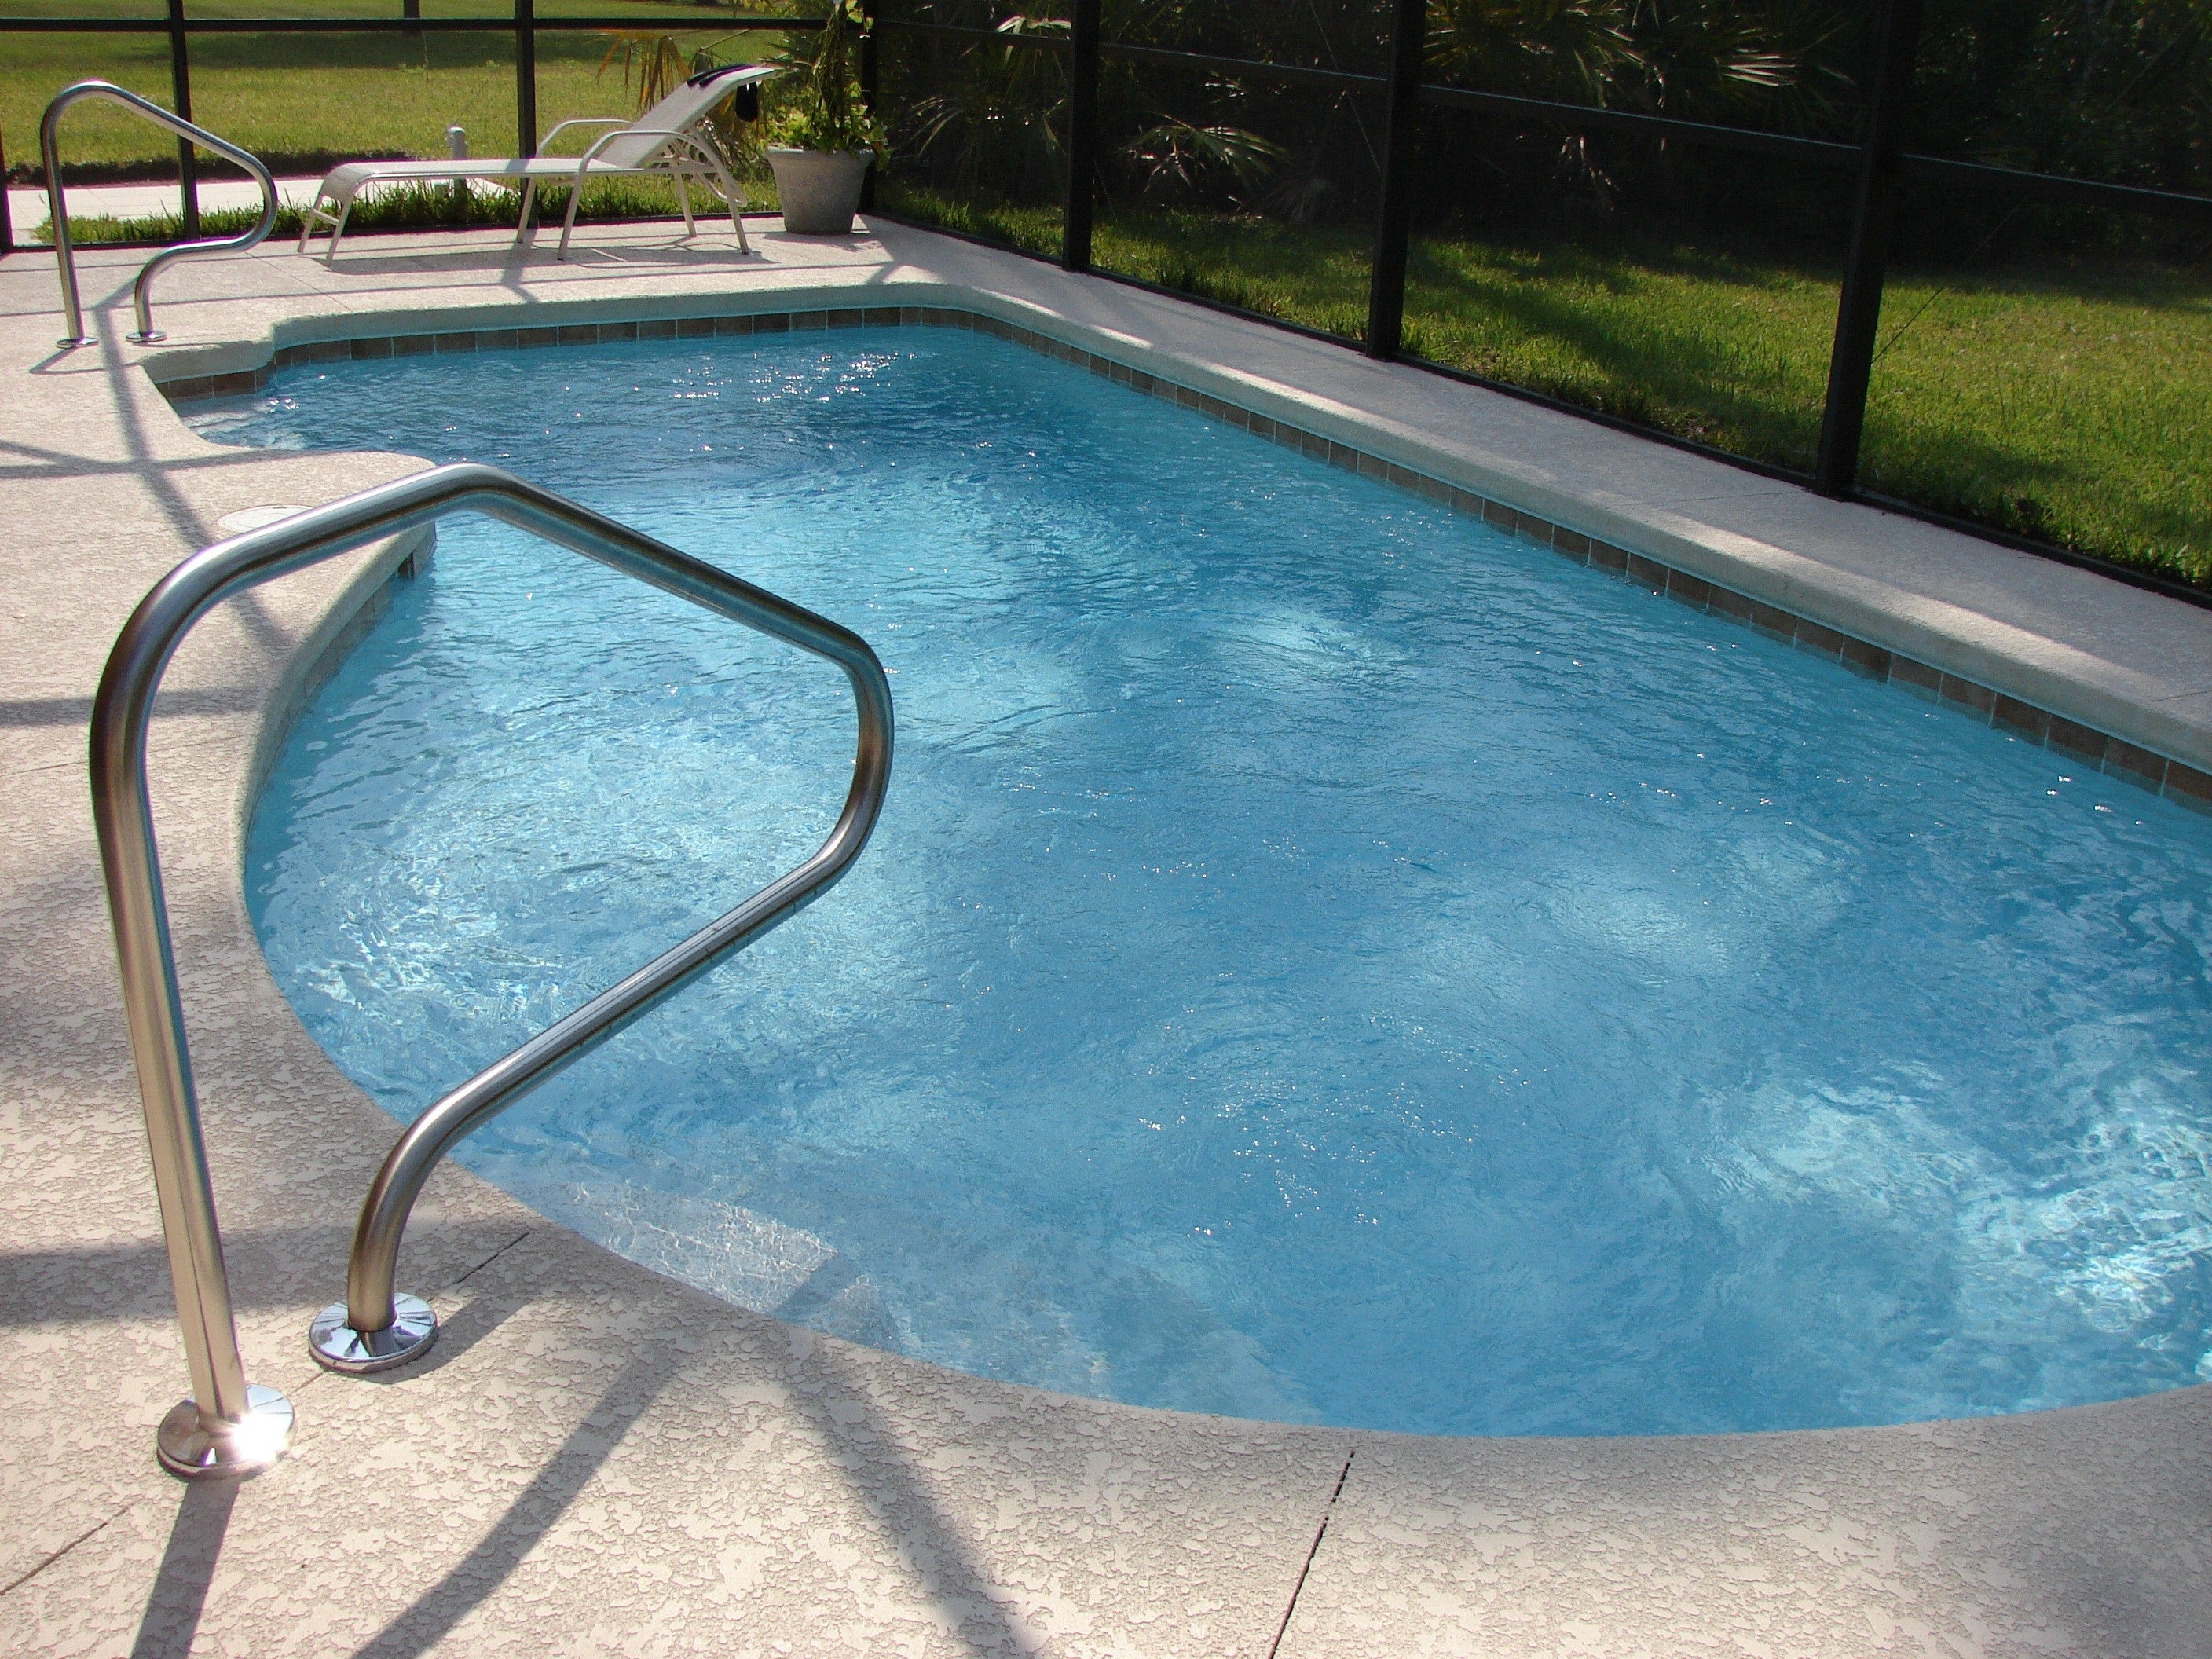 HOG article comparison of Gas Vs pool heat pump, which is better?